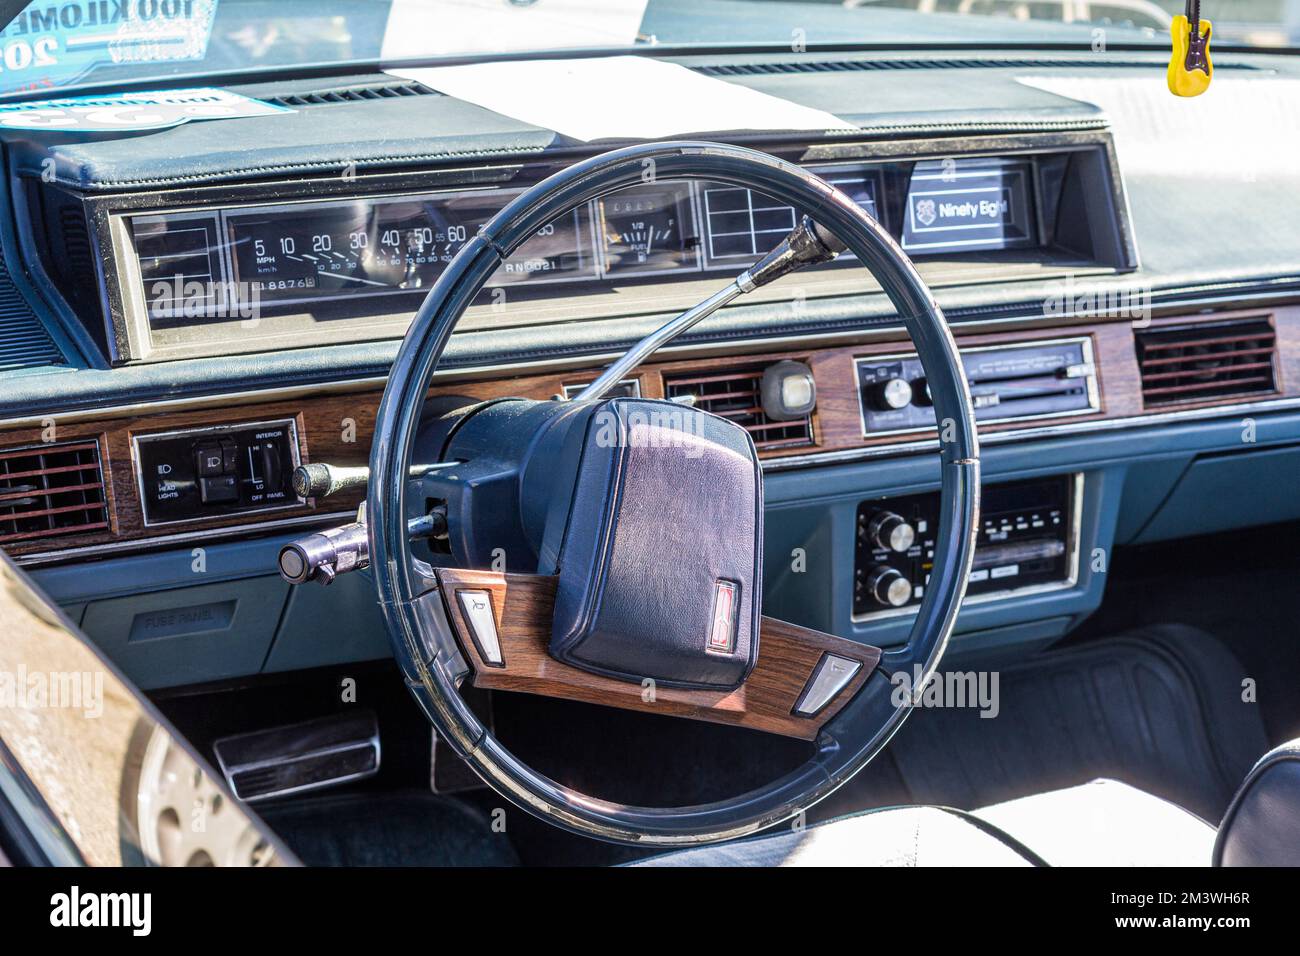 An interior view of an Oldsmobile 98 with a dashboard - a vintage luxury American car Stock Photo